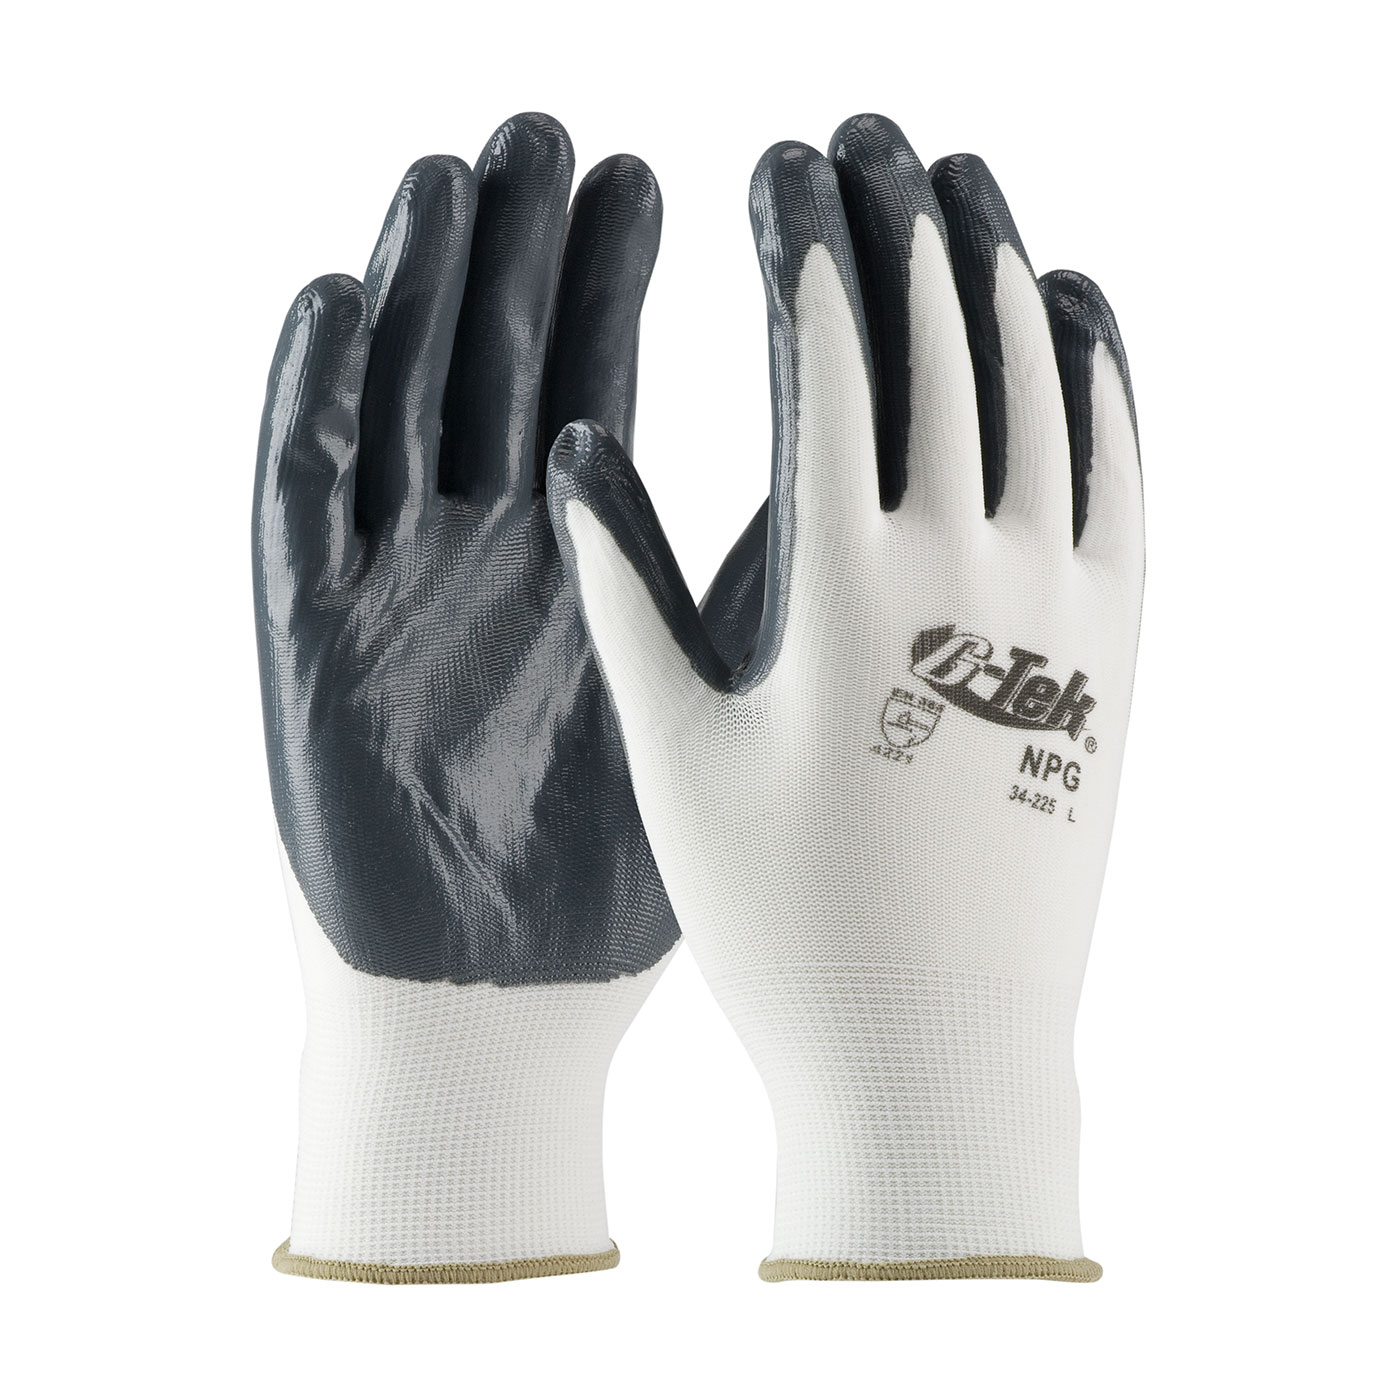 PIP 34-225/L G-Tek GP Seamless Knit Nylon Glove with Nitrile Coated Smooth Grip on Palm & Fingers - Large PID-34 225 L